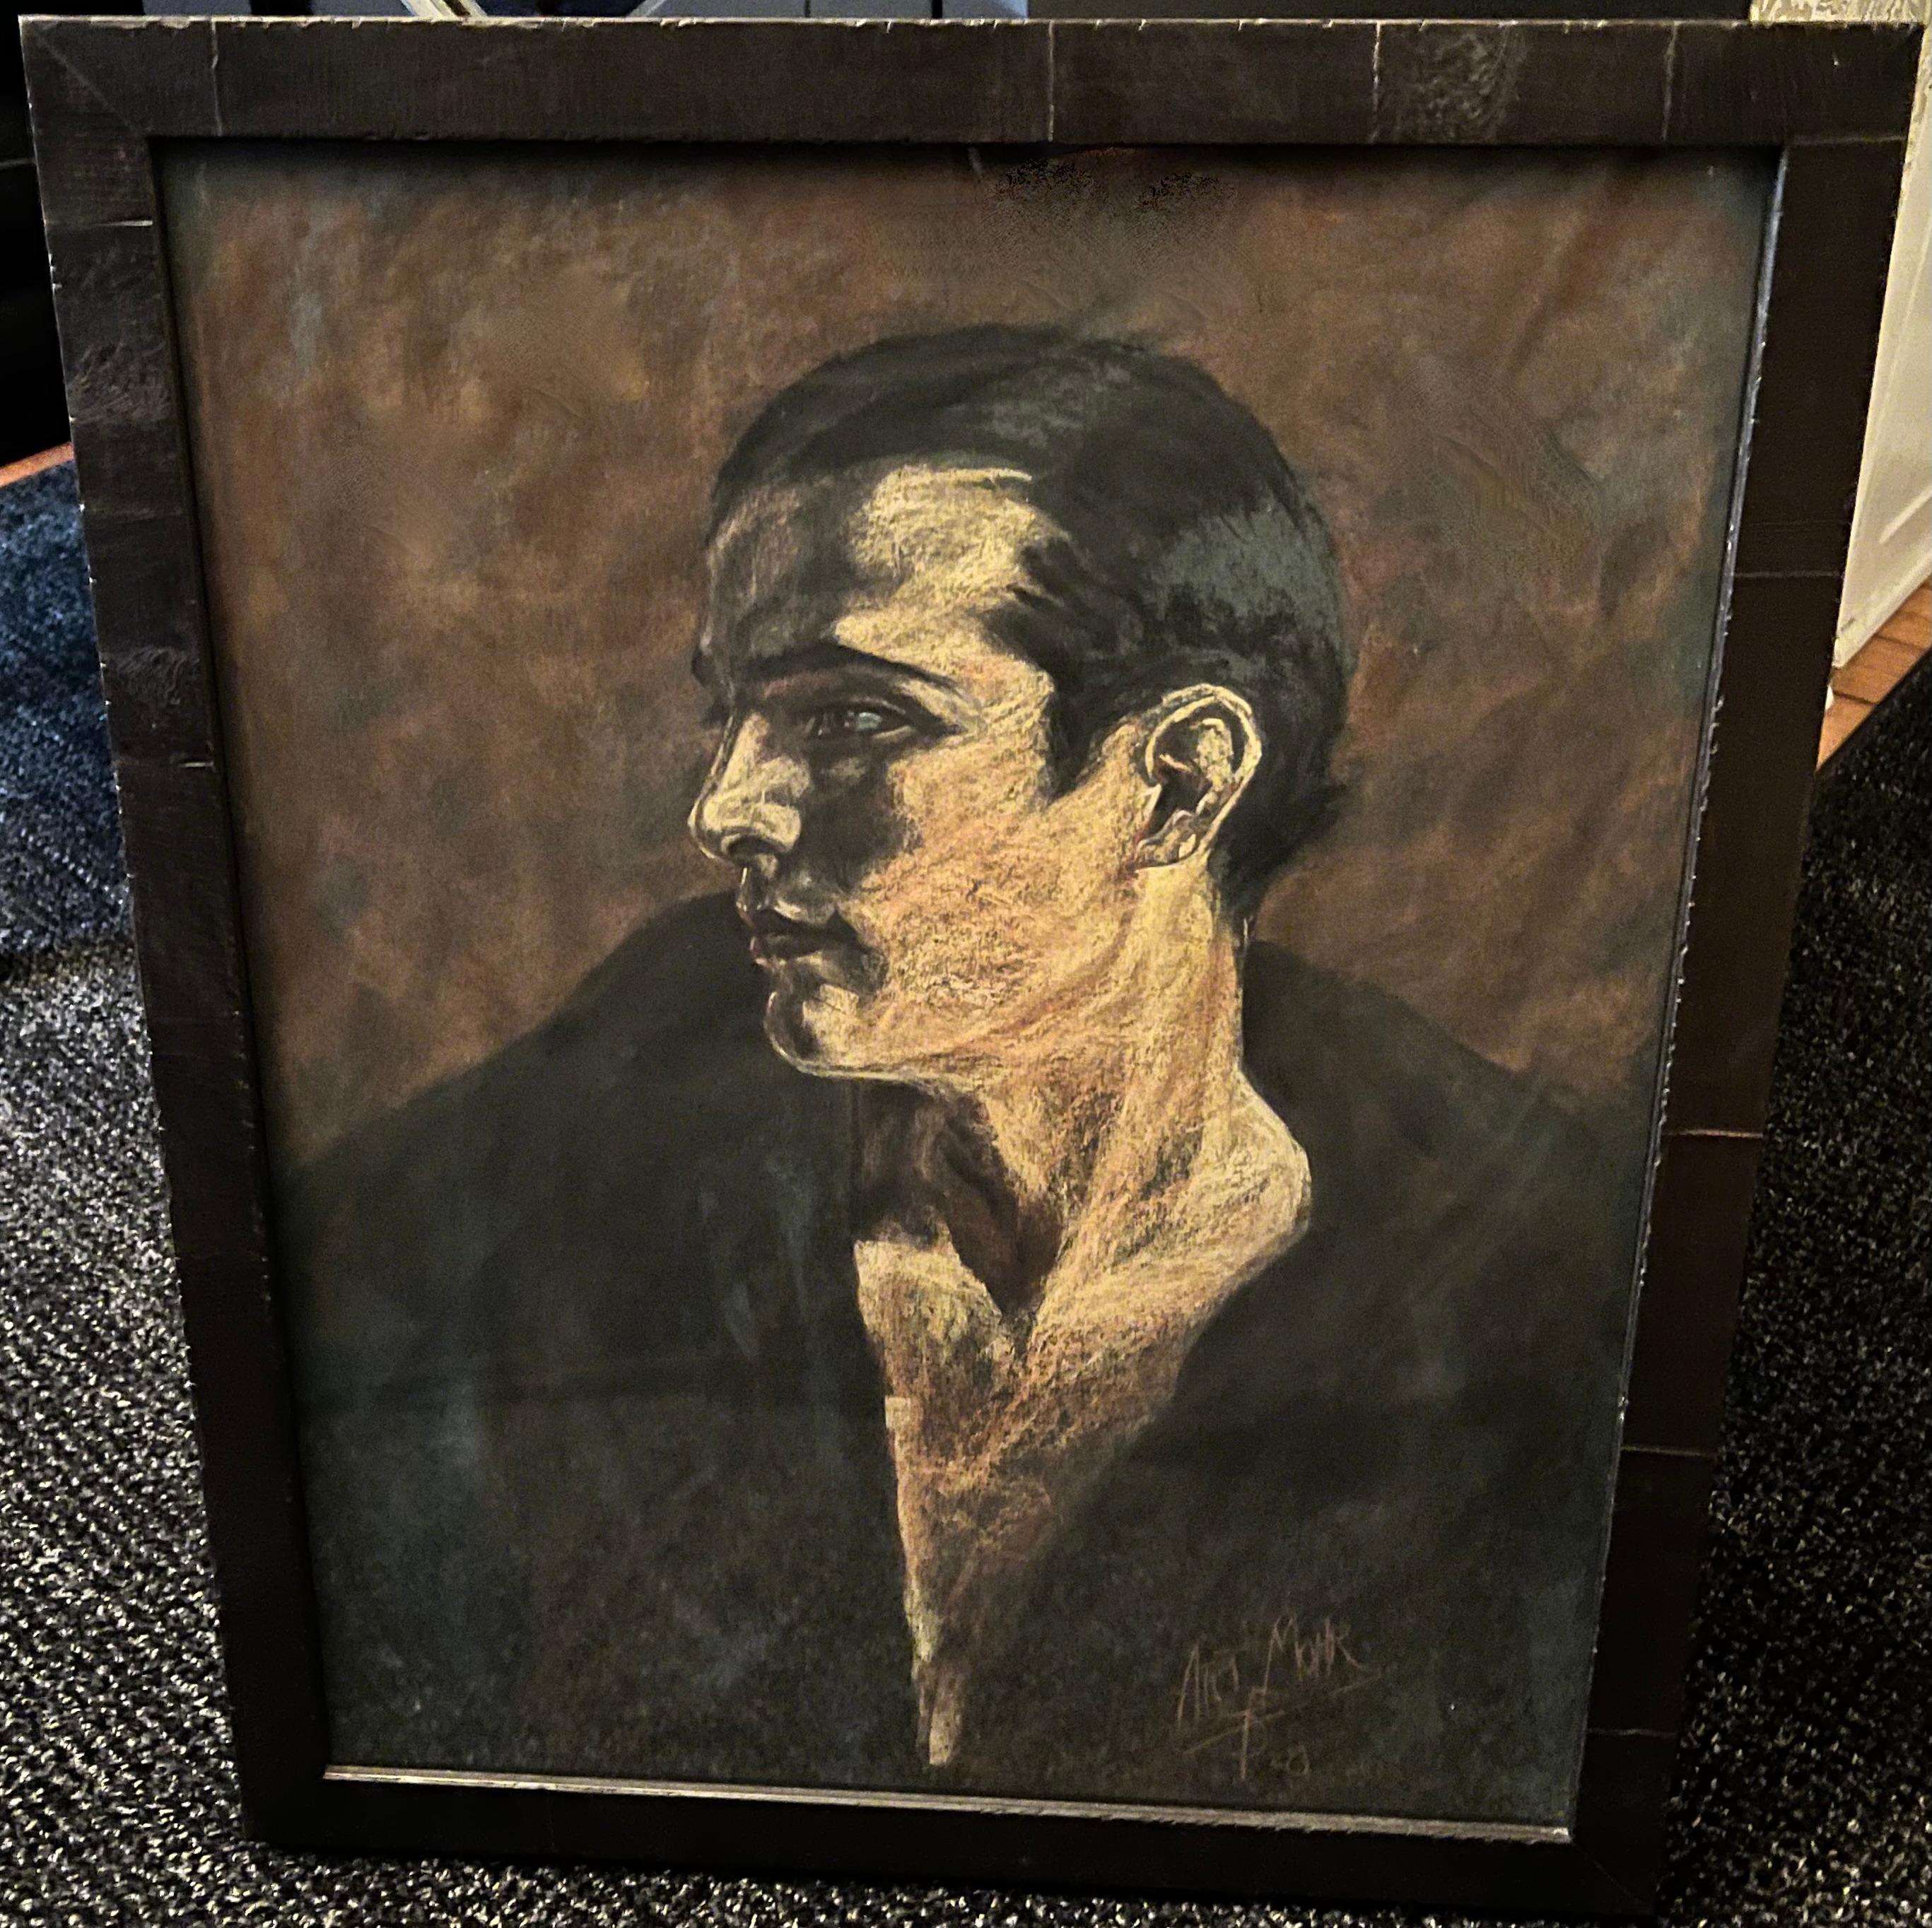 A hand done signed Pastel of Rudolph Valentino - nice detailing and dynamic image - a compliment to many rooms. The frame is of wood and uniquely a bit brutalist - all I n very good condition.